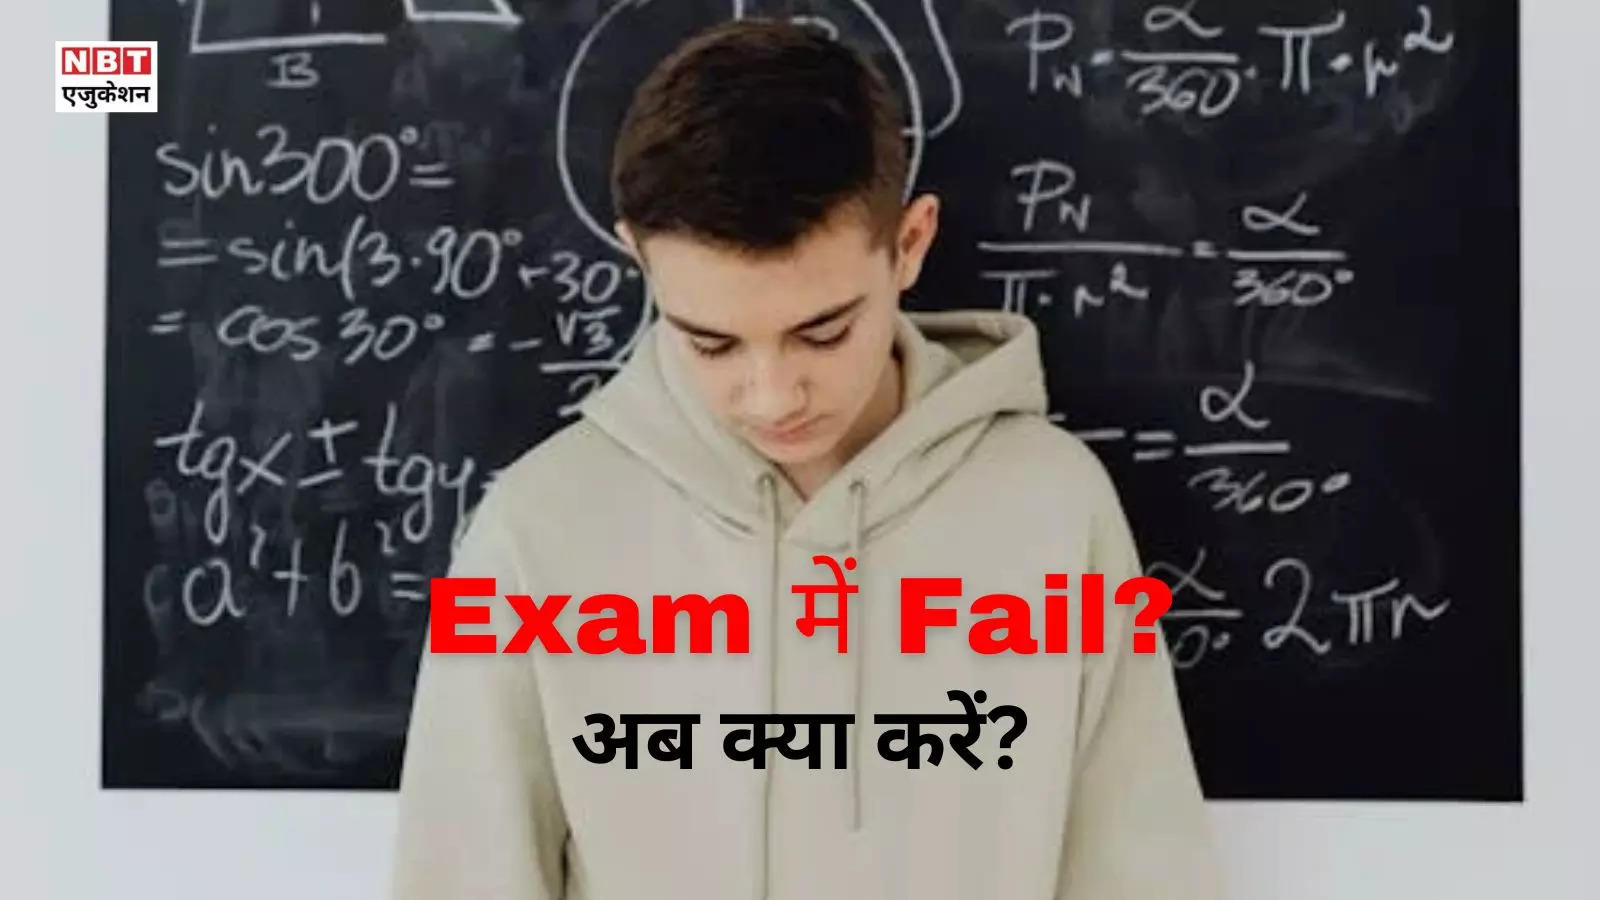 NEET, JEE, UPSC… what will happen if you fail, these 6 things will prepare you for every disaster